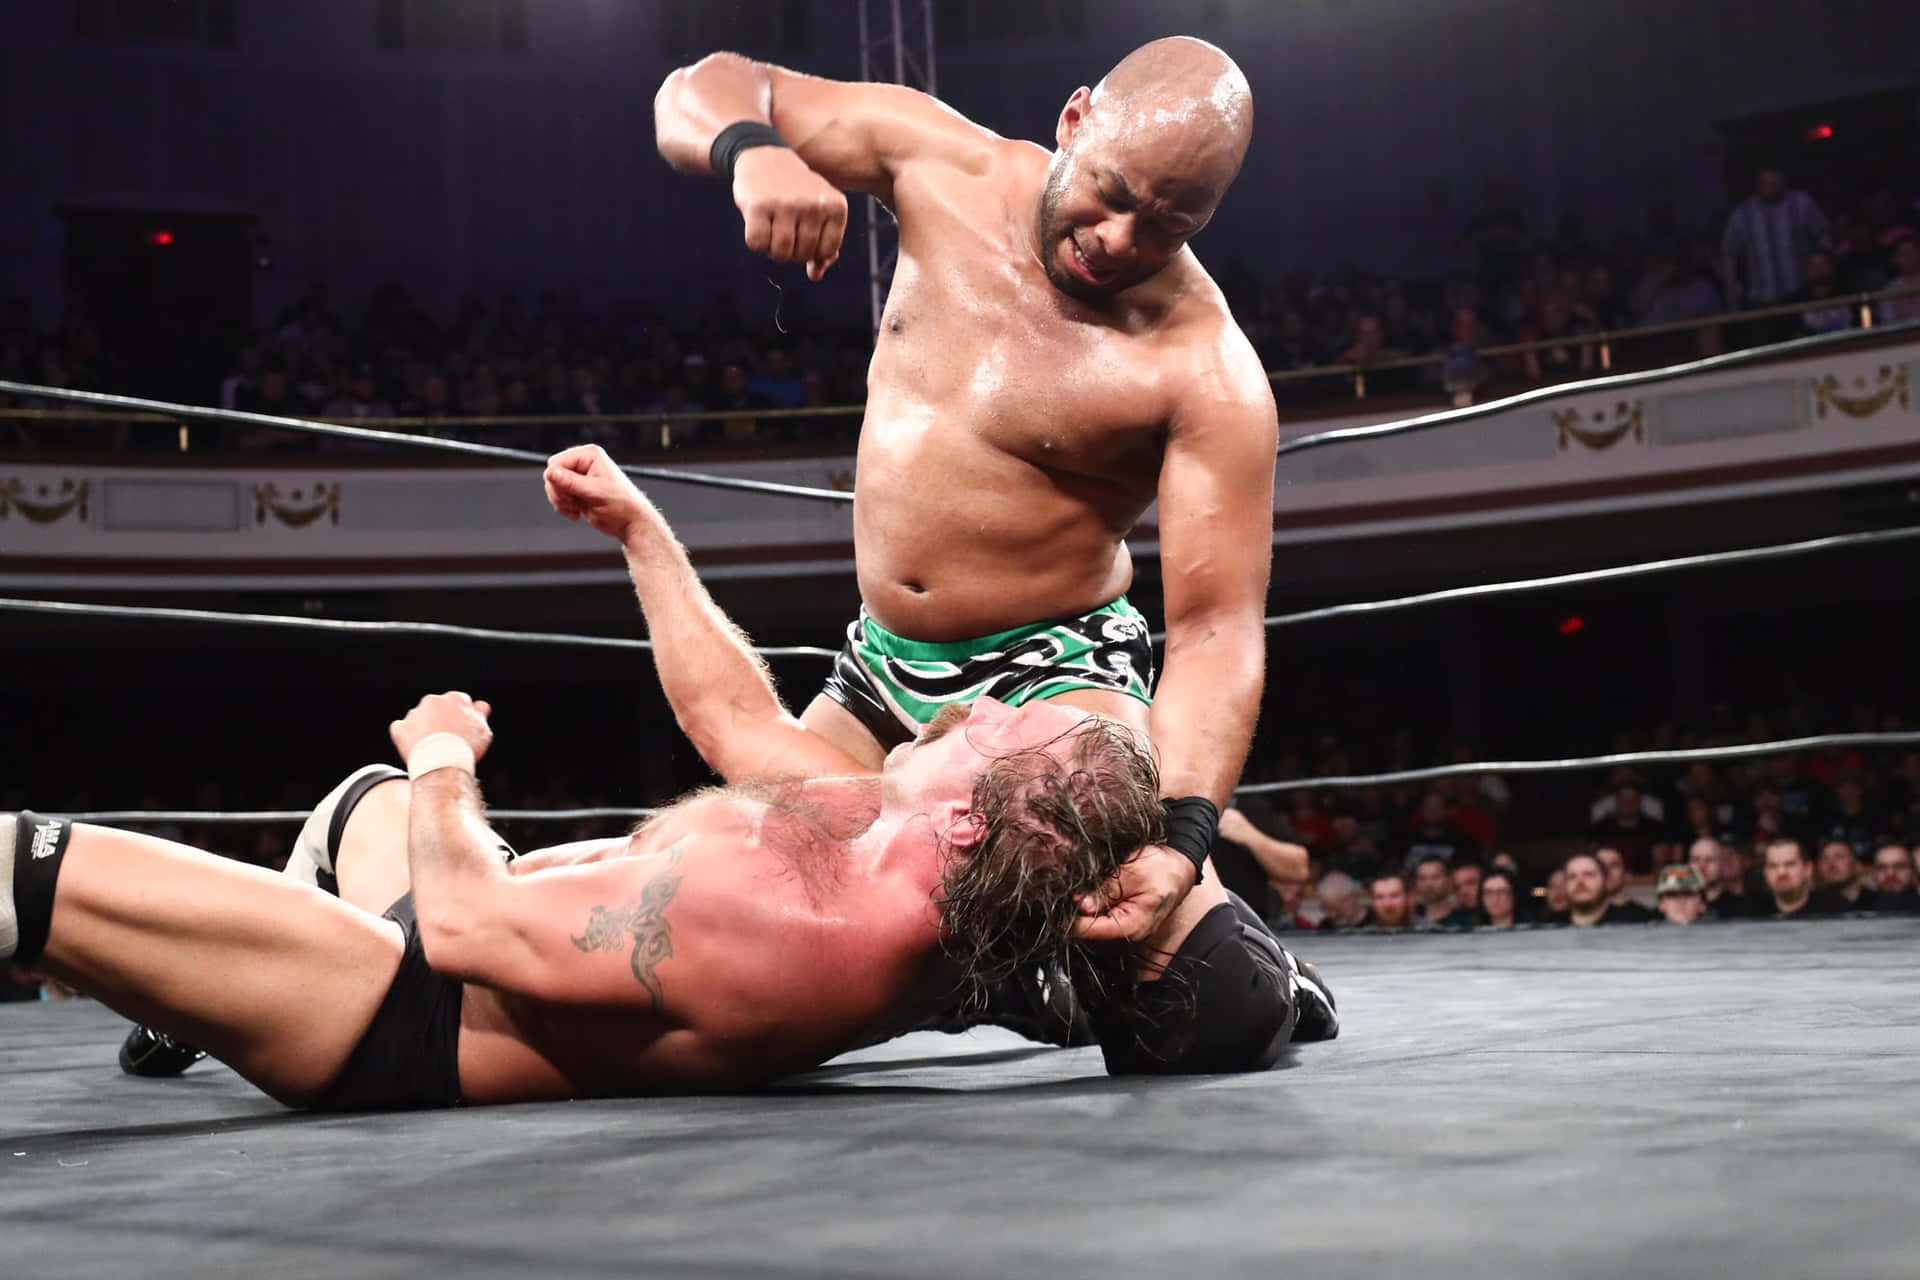 Jaylethal Wwe Nxt Fight: Jay Lethal Wwe Nxt Fight Wallpaper